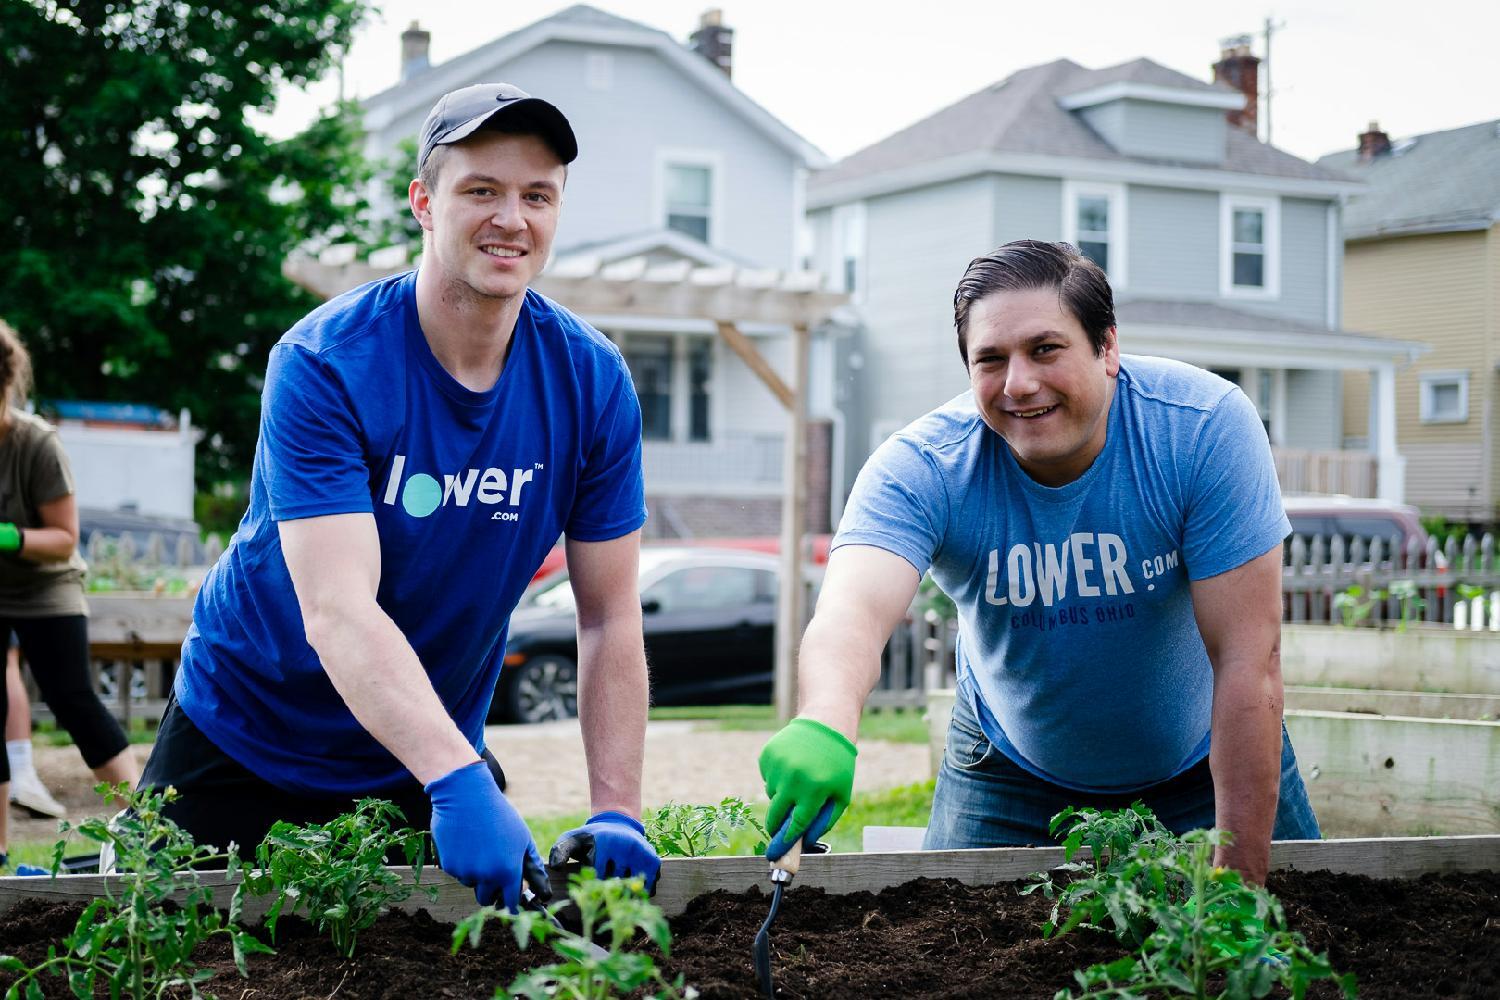 The Lower.com team helps Nationwide Healthy Homes plant a garden in an underserved neighborhood in Columbus, Ohio.